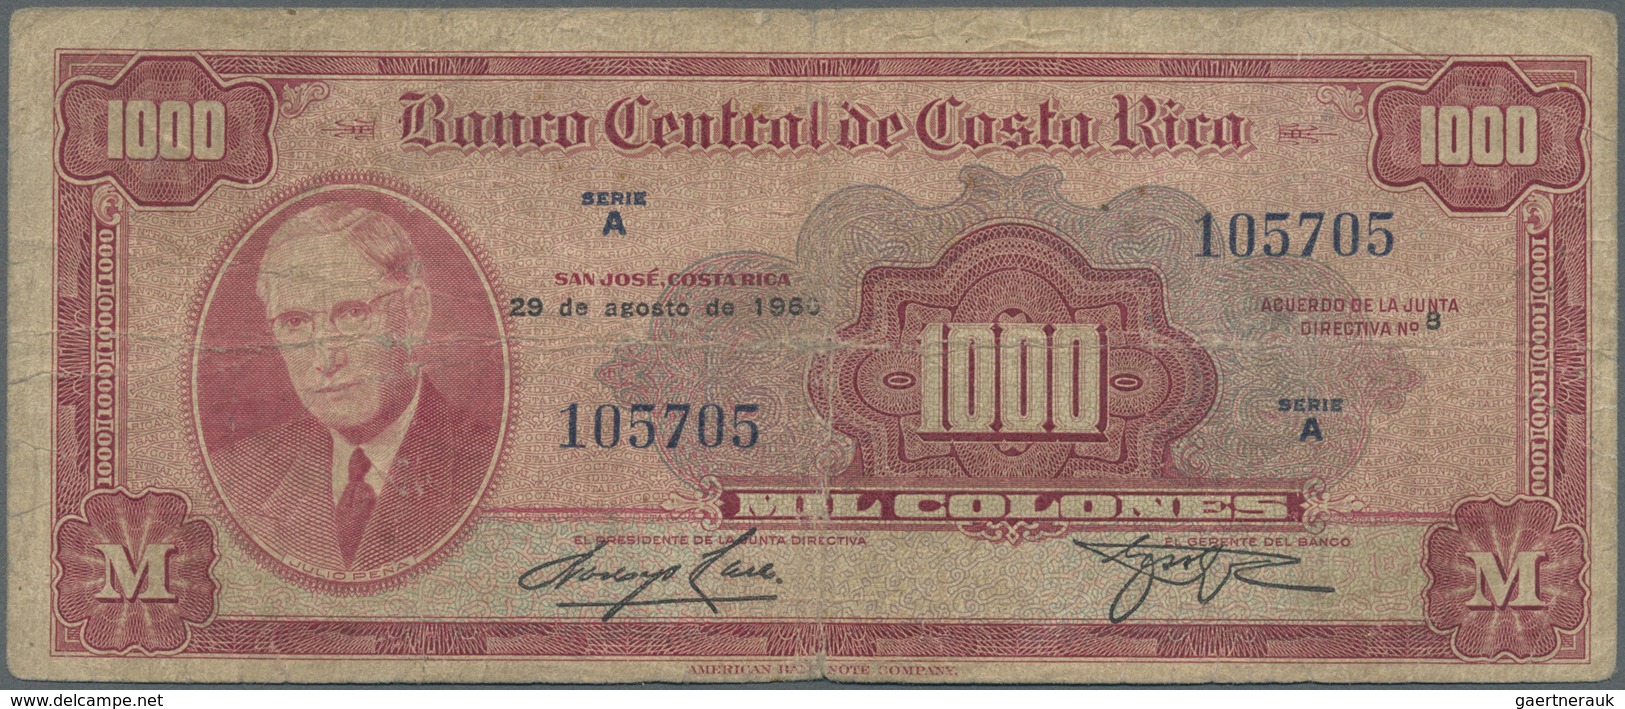 Costa Rica: Set Of 2 Notes 1000 Colones 1960 And 1974 P. 226b, C, Both Used With Folds And Creases, - Costa Rica